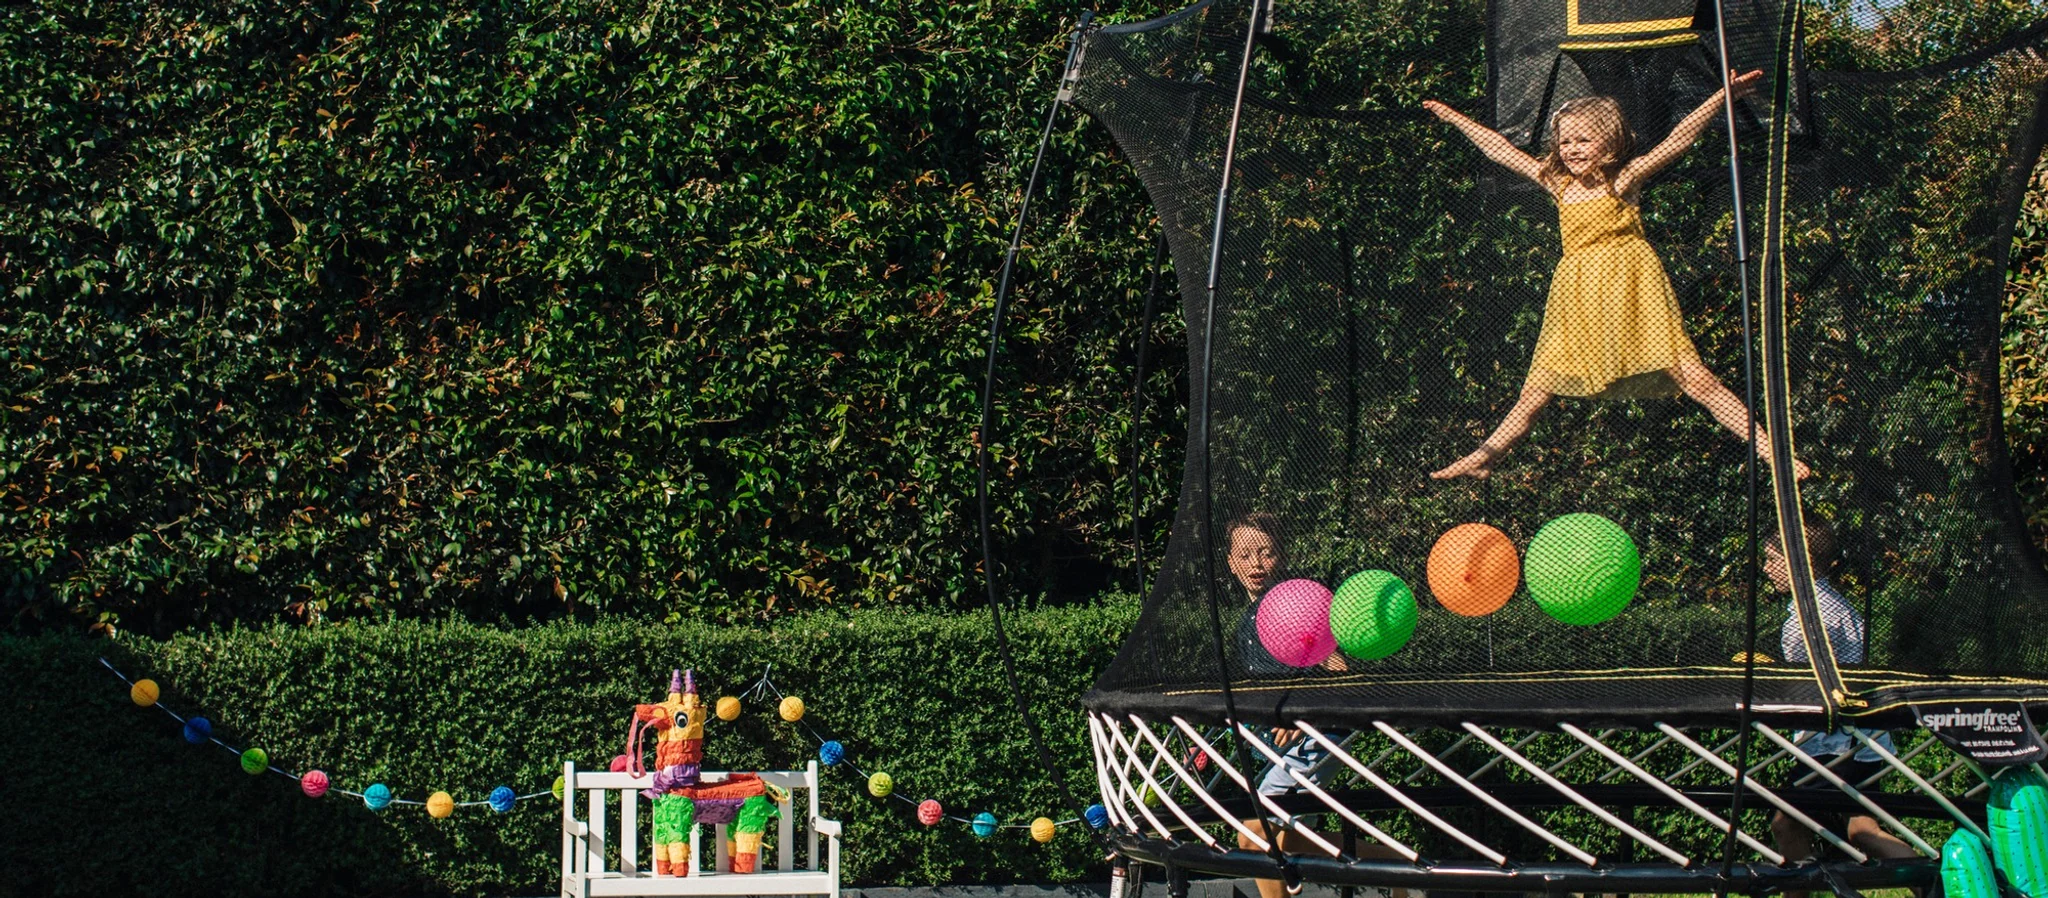 Kids Jumping Safely On a Springfree Trampoline